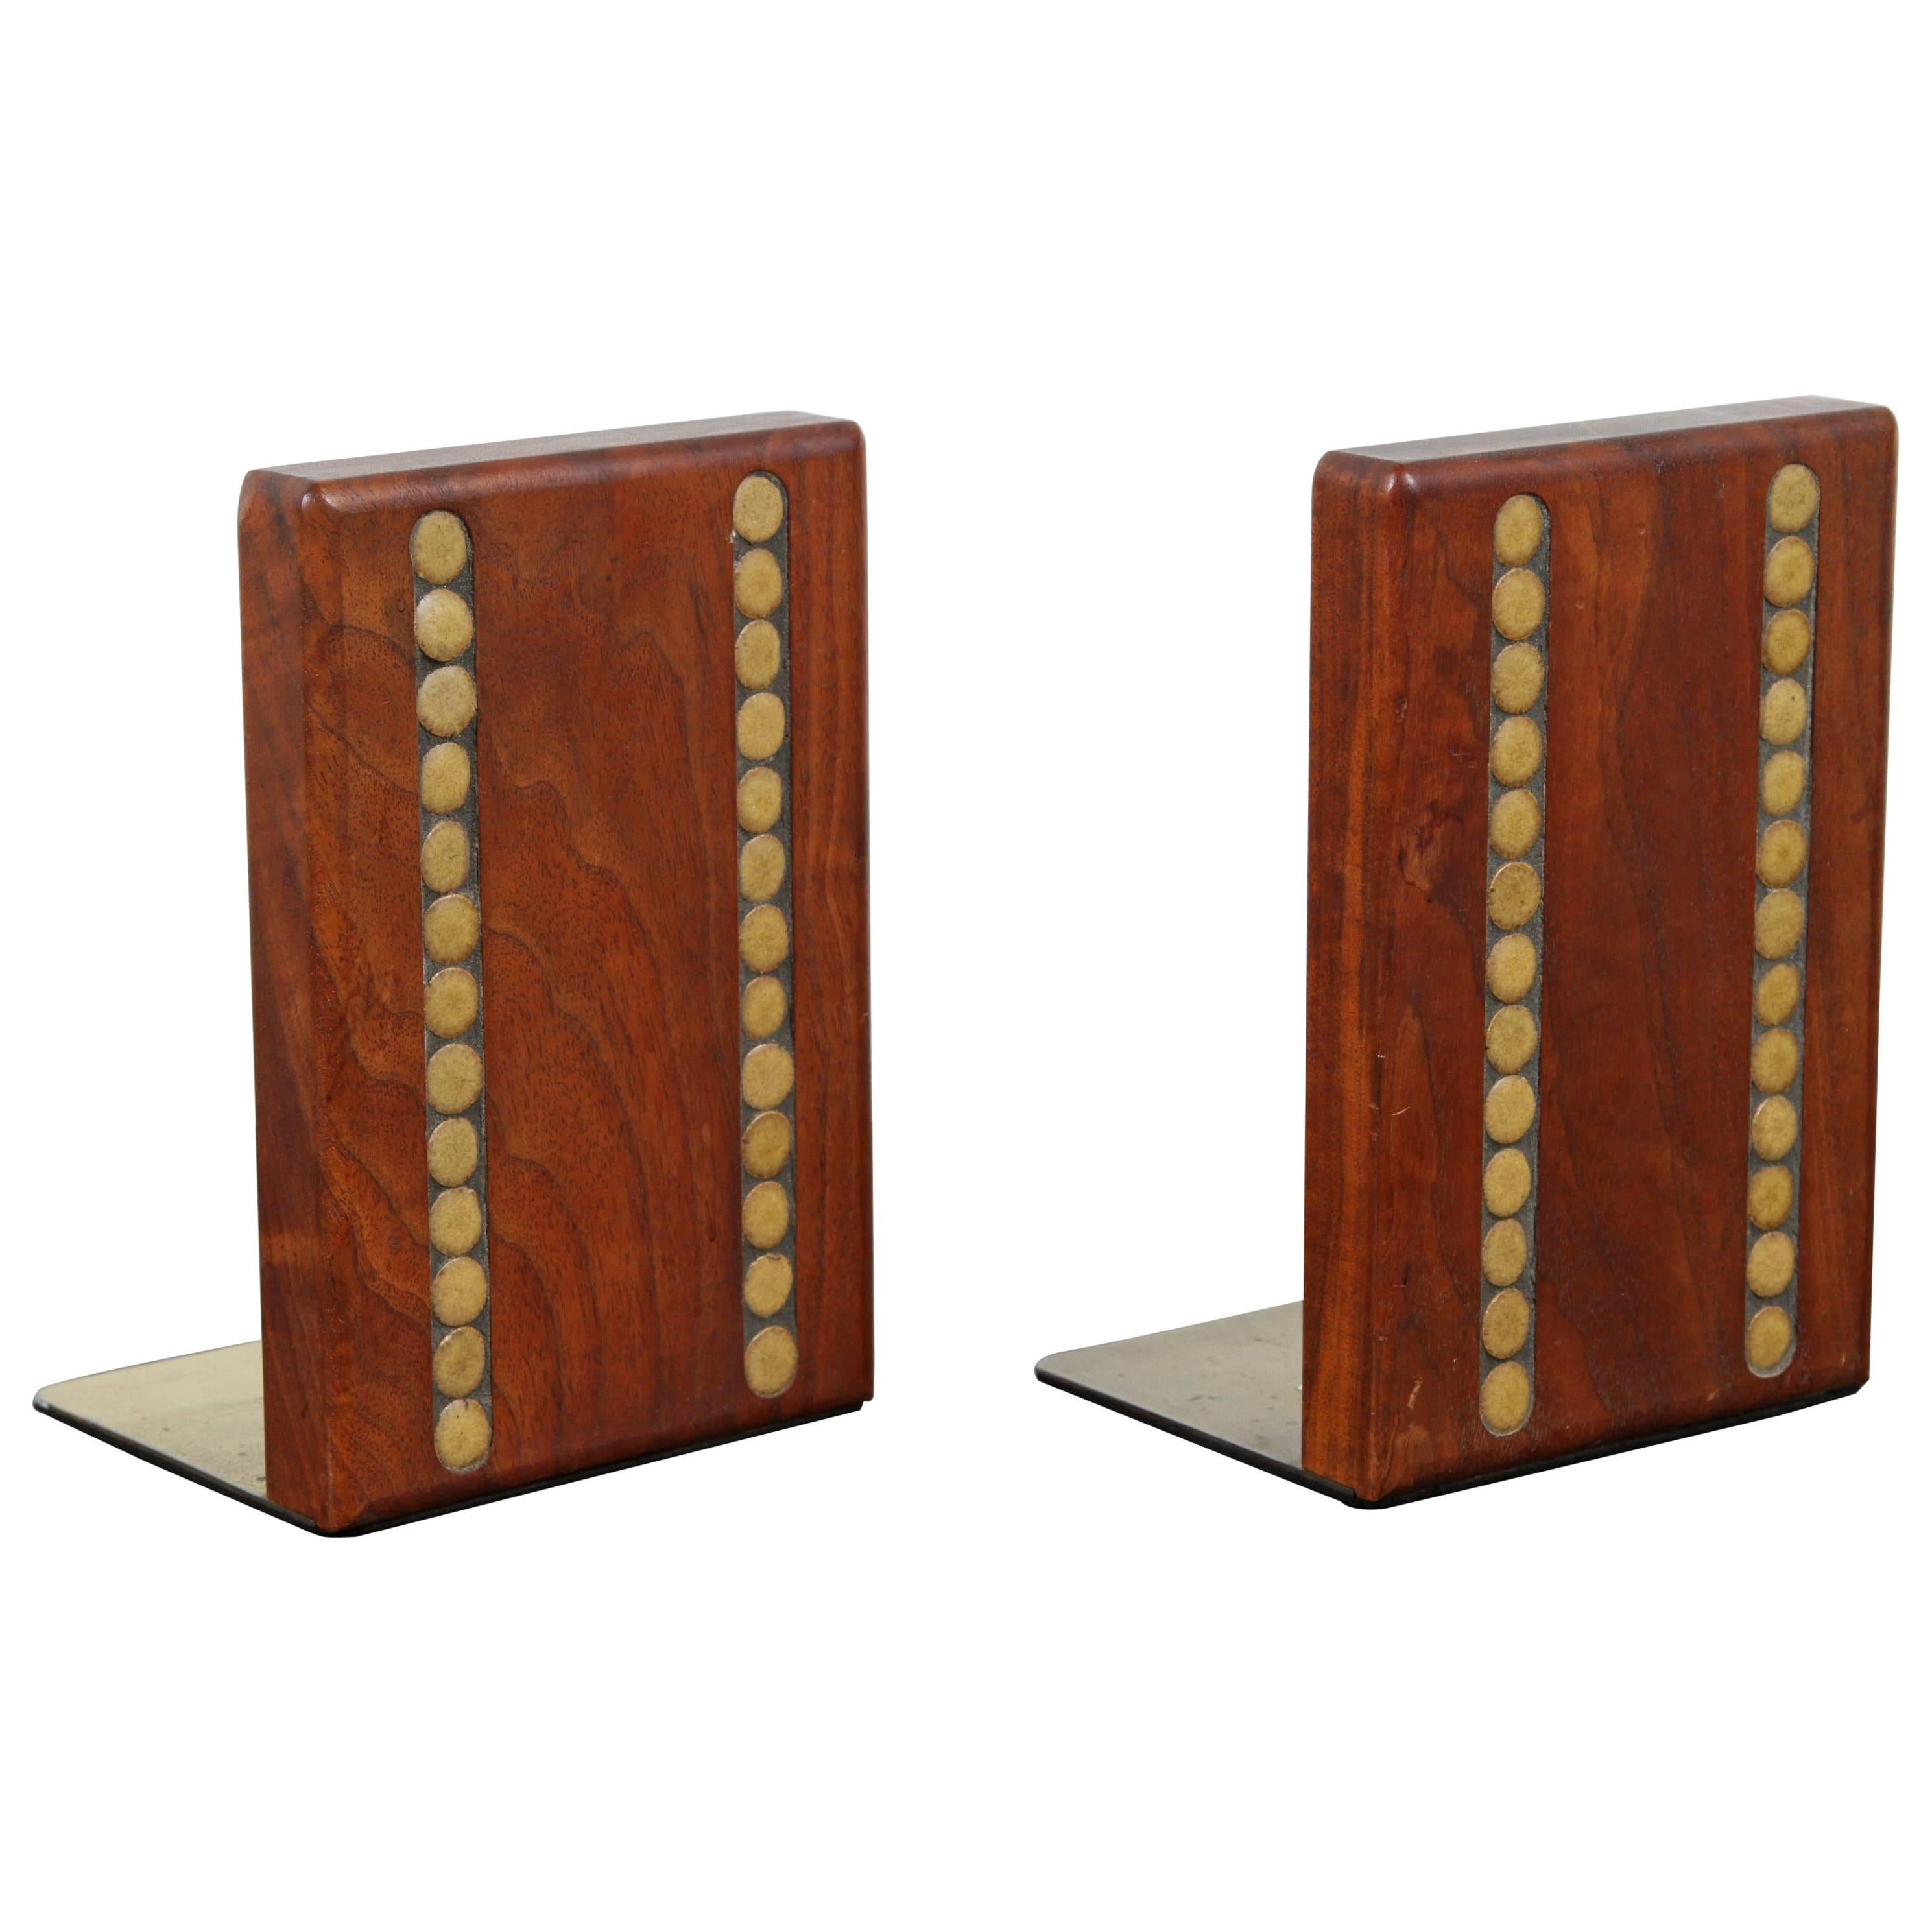 Teak and Ceramic Bookends by Martz